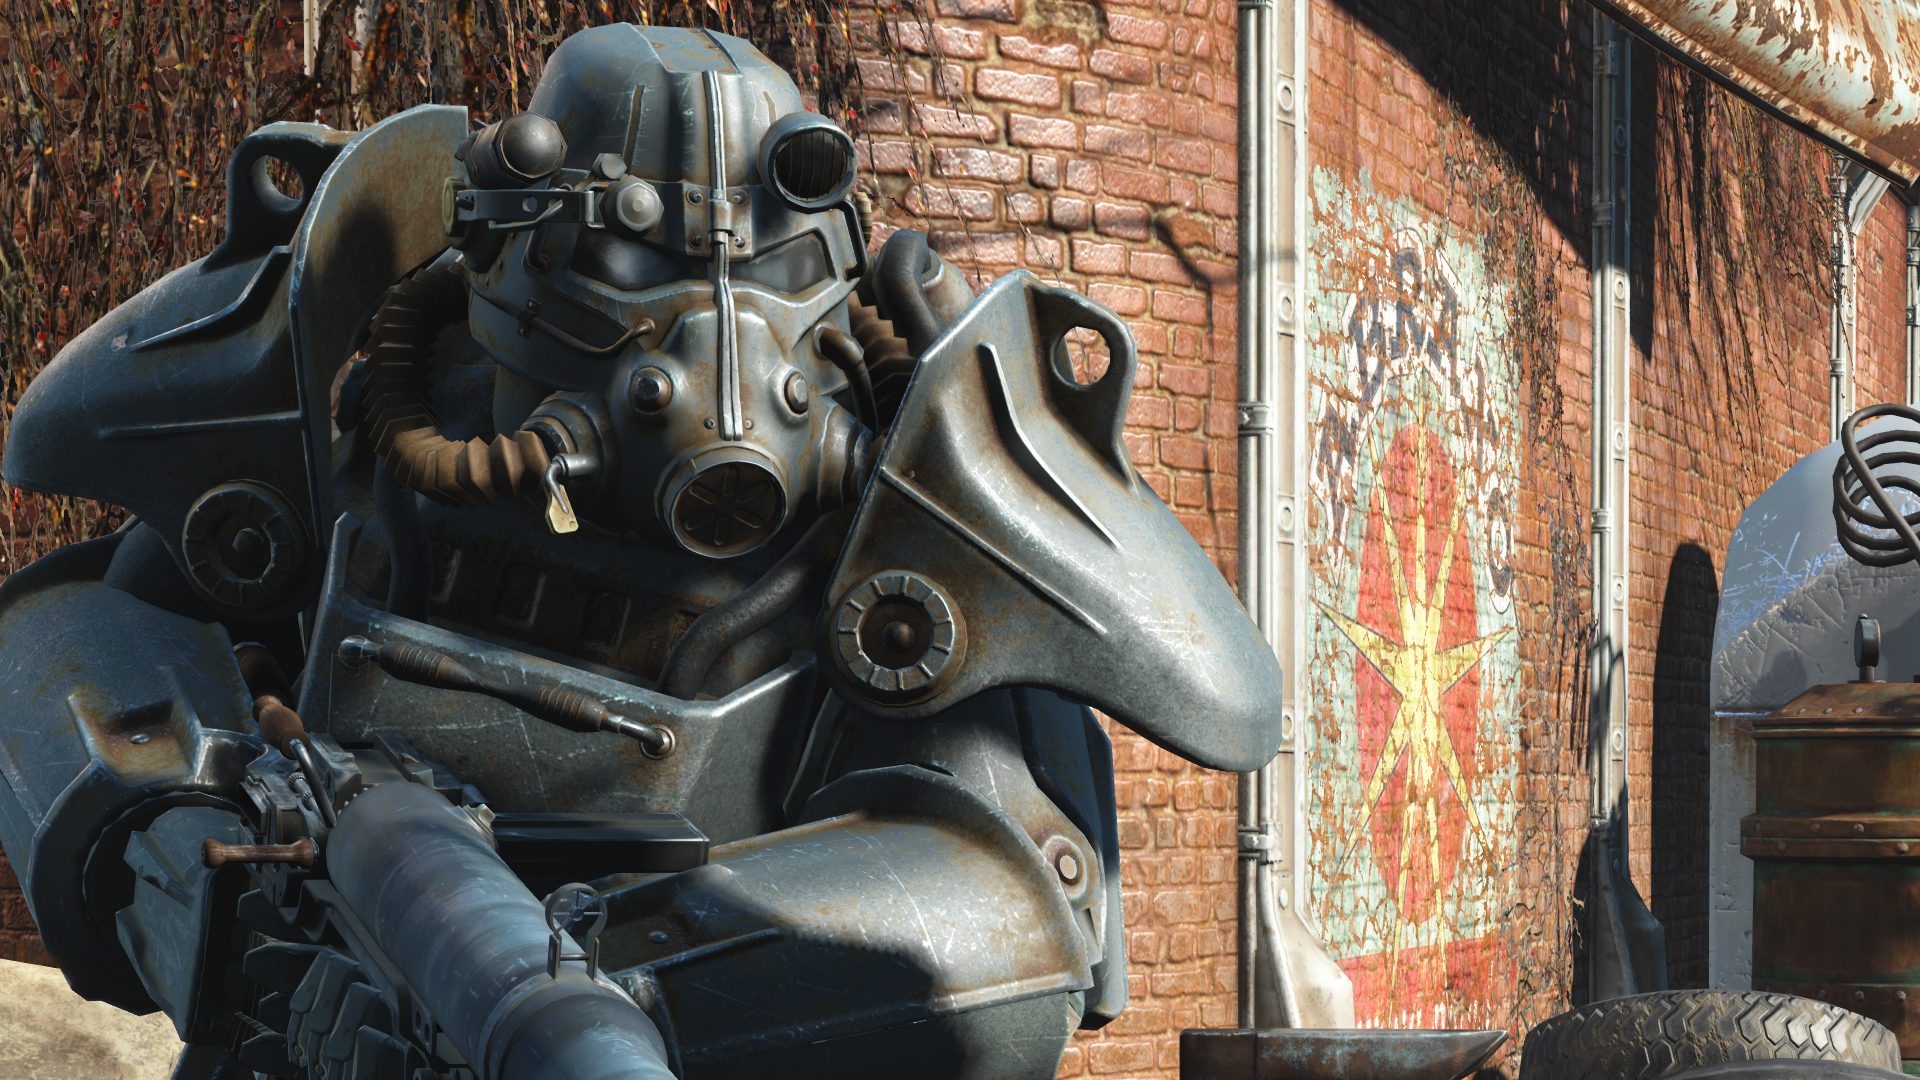 Fallout 4 high-resolution patch out now on PC and needs a whopping 58GB of space